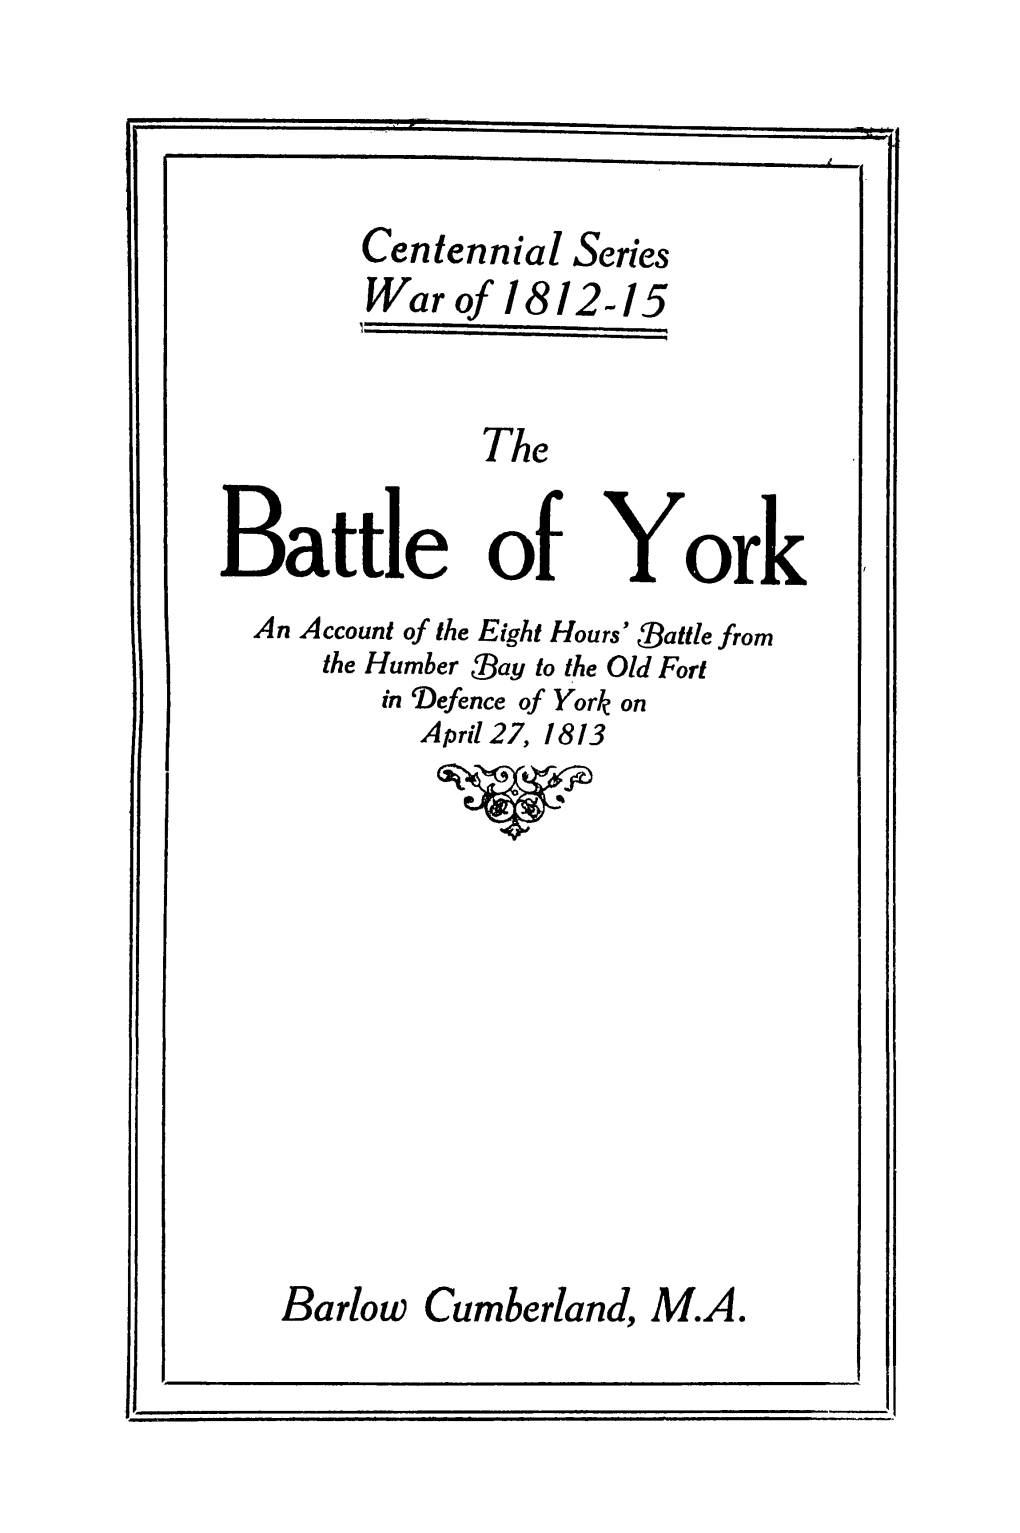 Battle of York an Account of the Eight Hours' {Battle from the Humber {Bay to the Old Fort in 'Ljefence of York on April 27, 1813 •